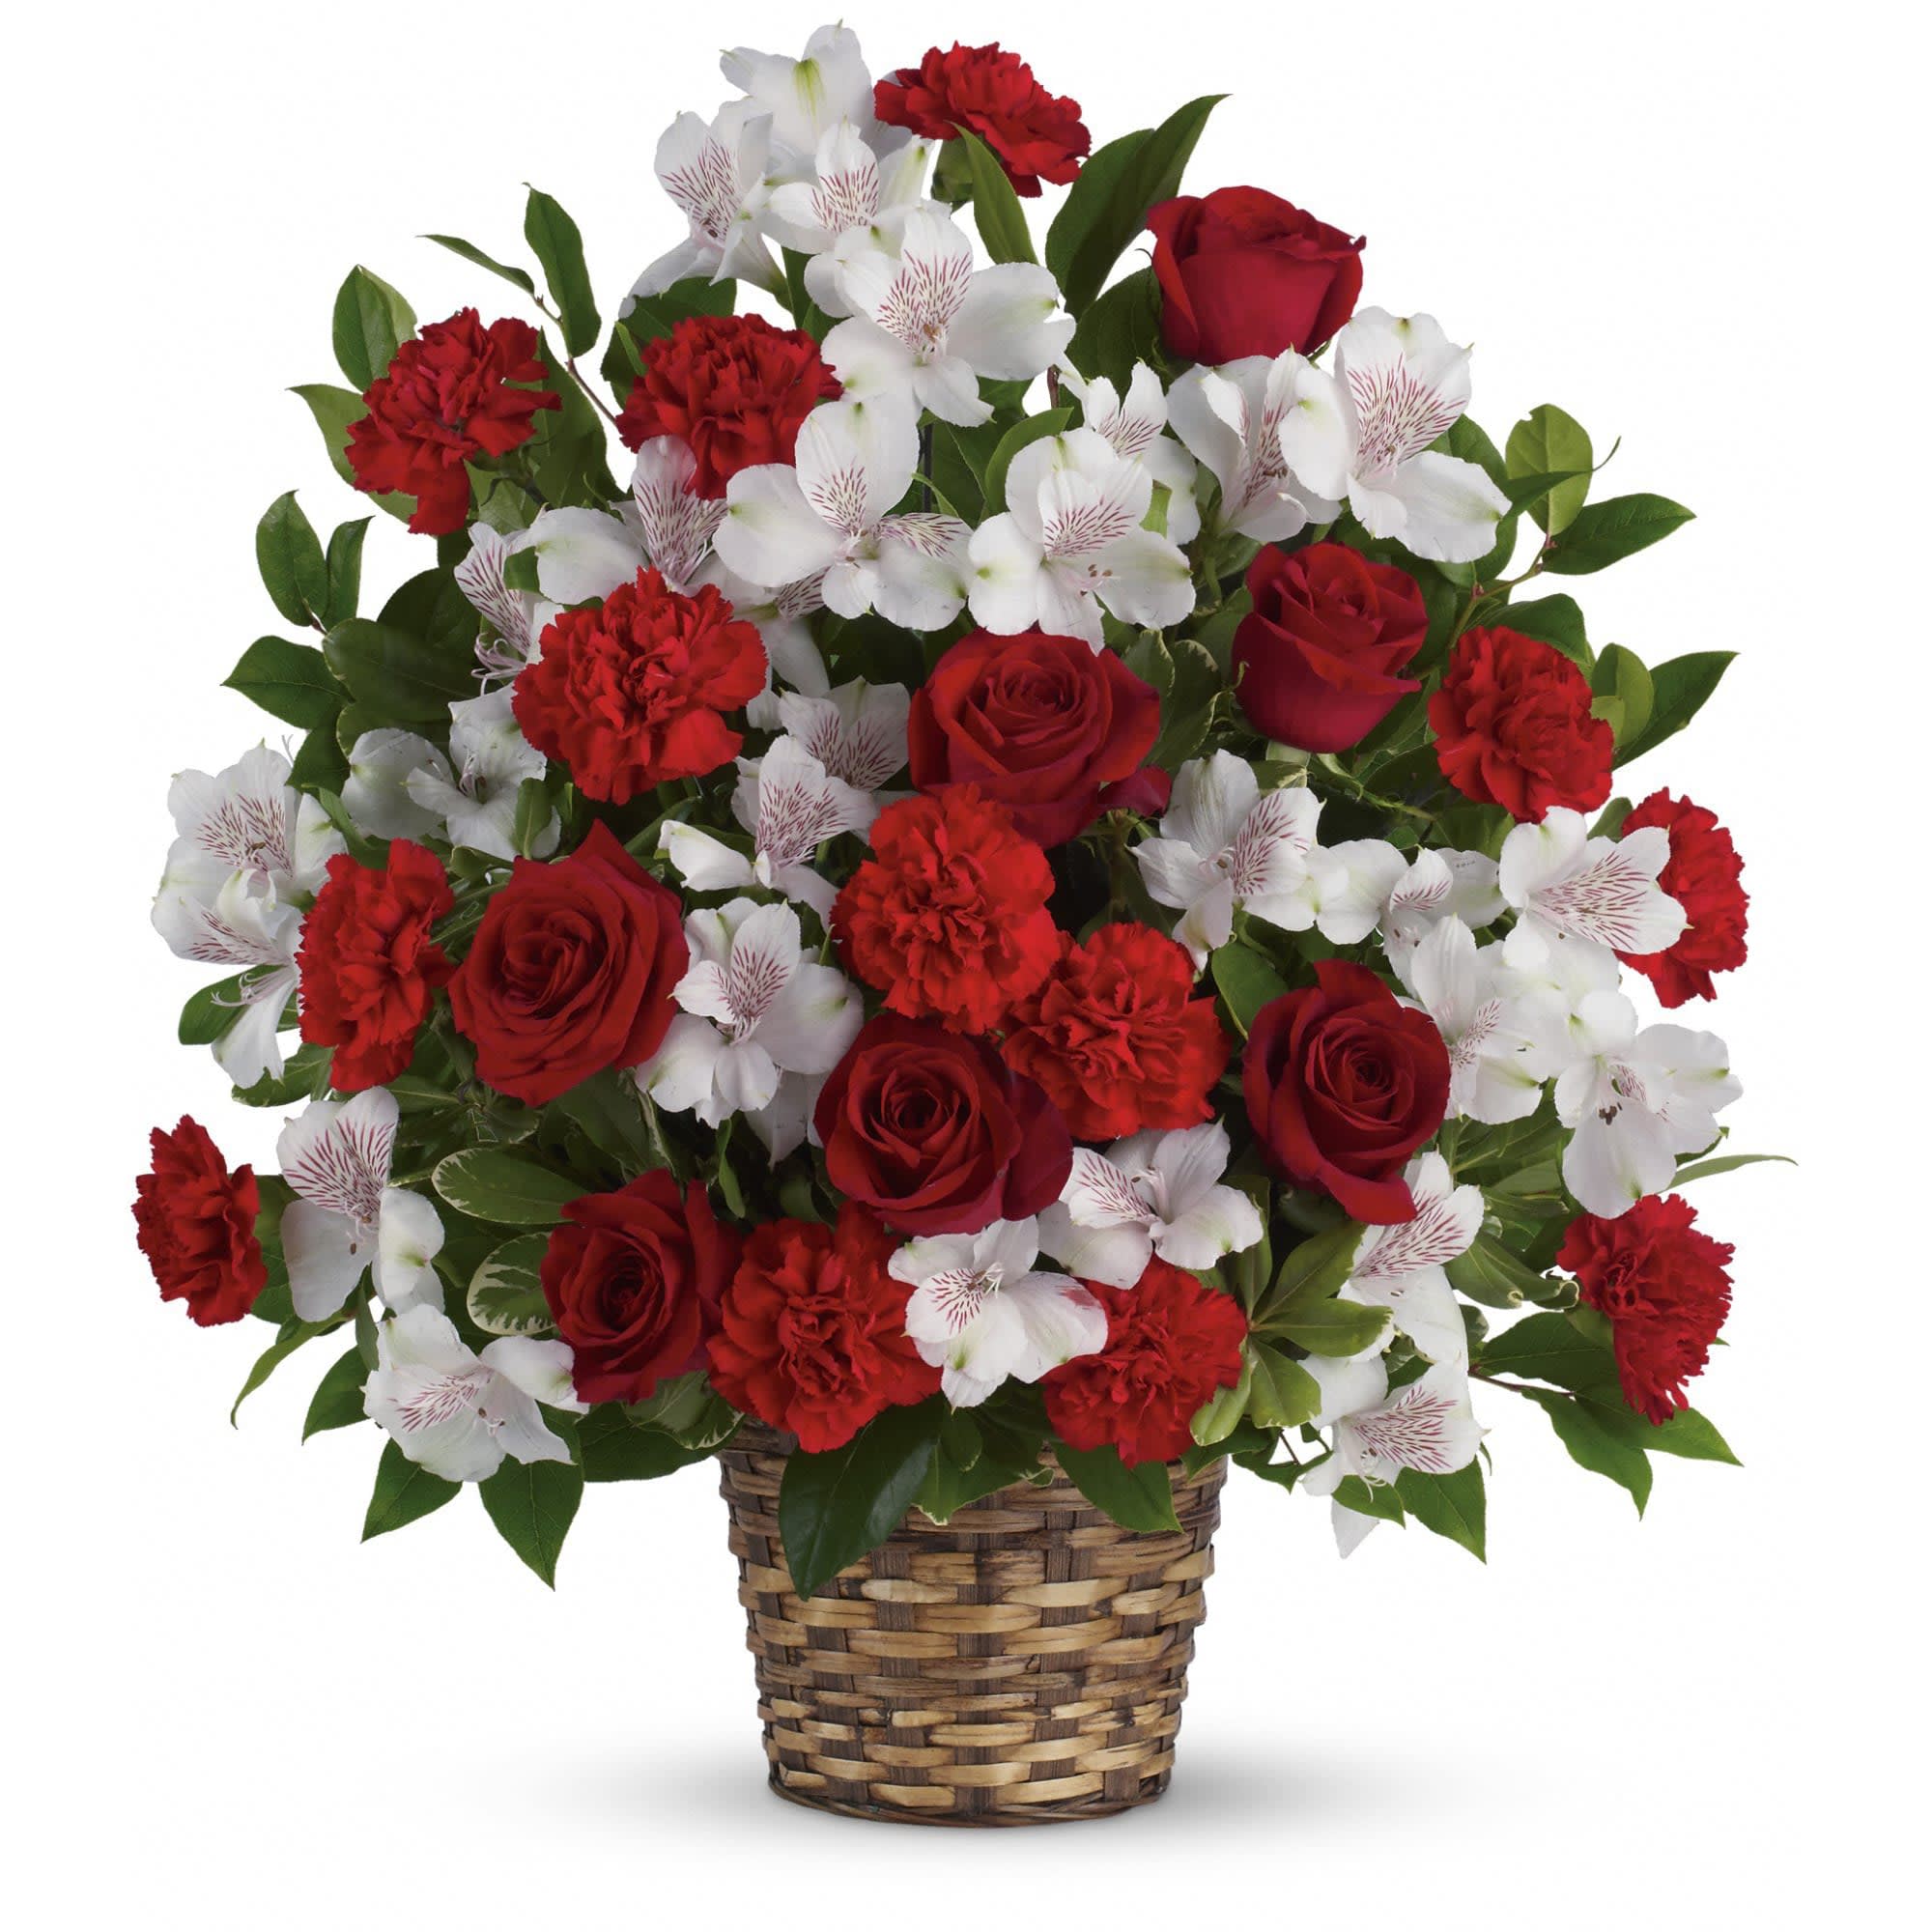 Truly Beloved - Reach out to the family at home with this lovely array of classic blooms artistically arranged in a beautifully woven basket. They'll be deeply touched. 